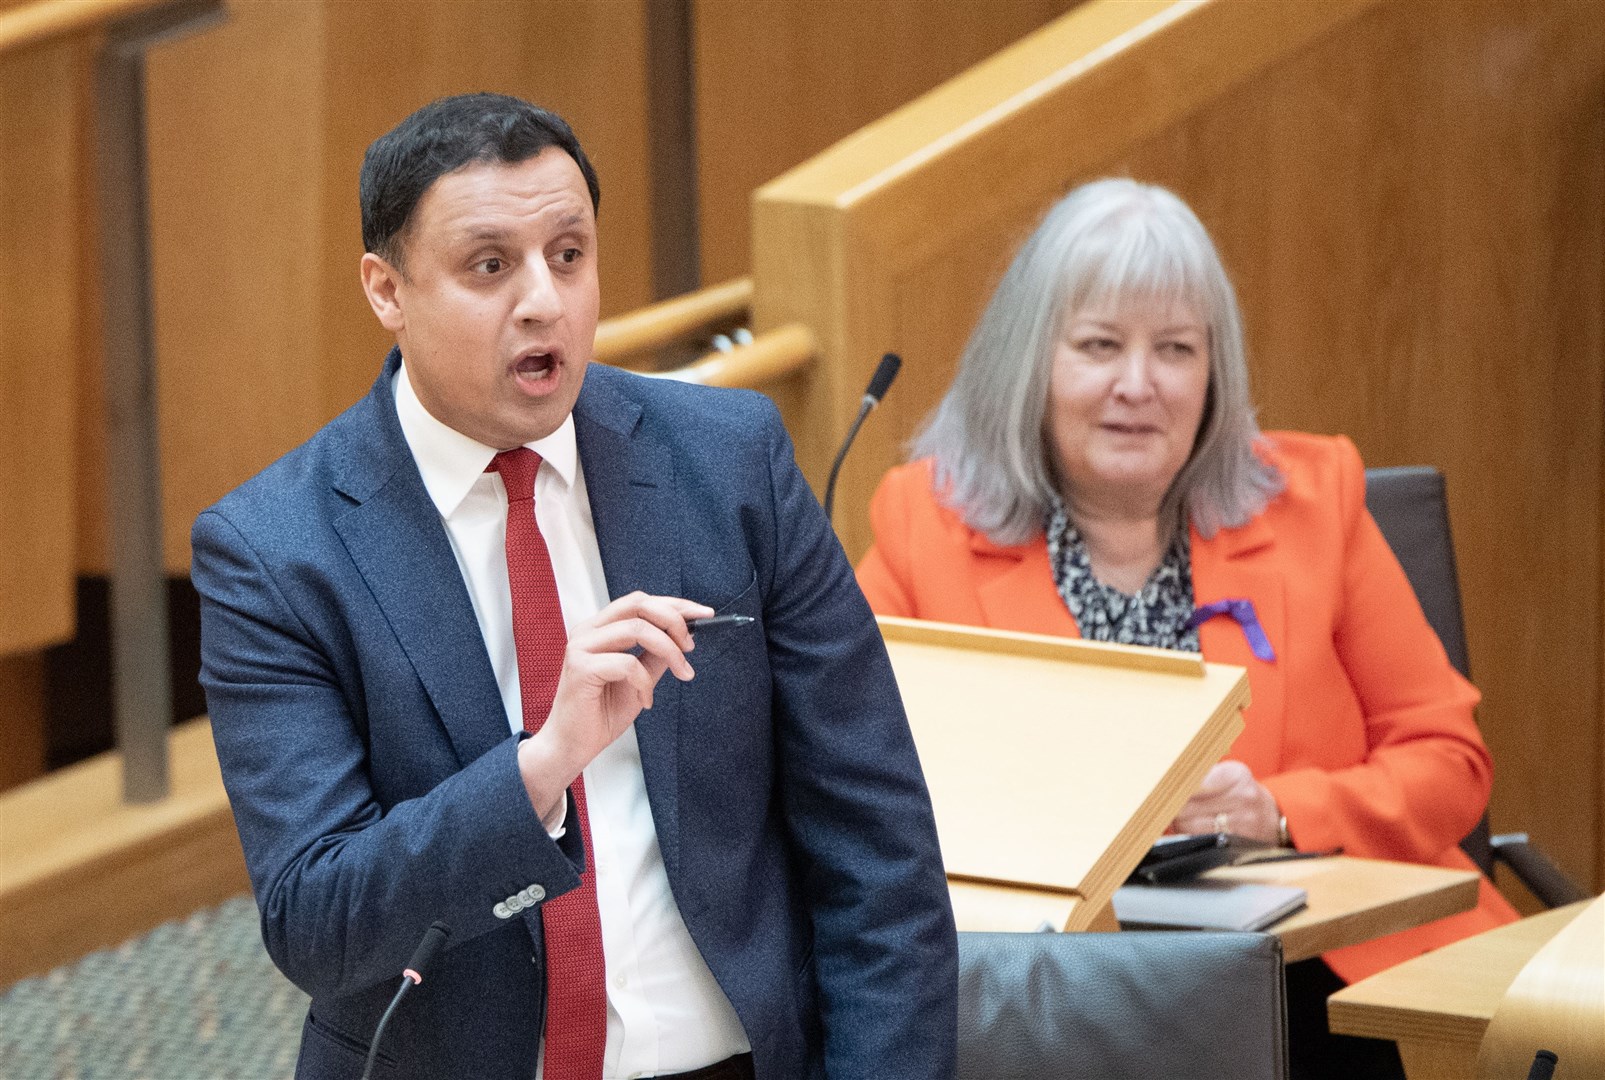 Scottish Labour leader Anas Sarwar is pressing ahead with his motion of no confidence in the Scottish Government (Lesley Martin/PA)